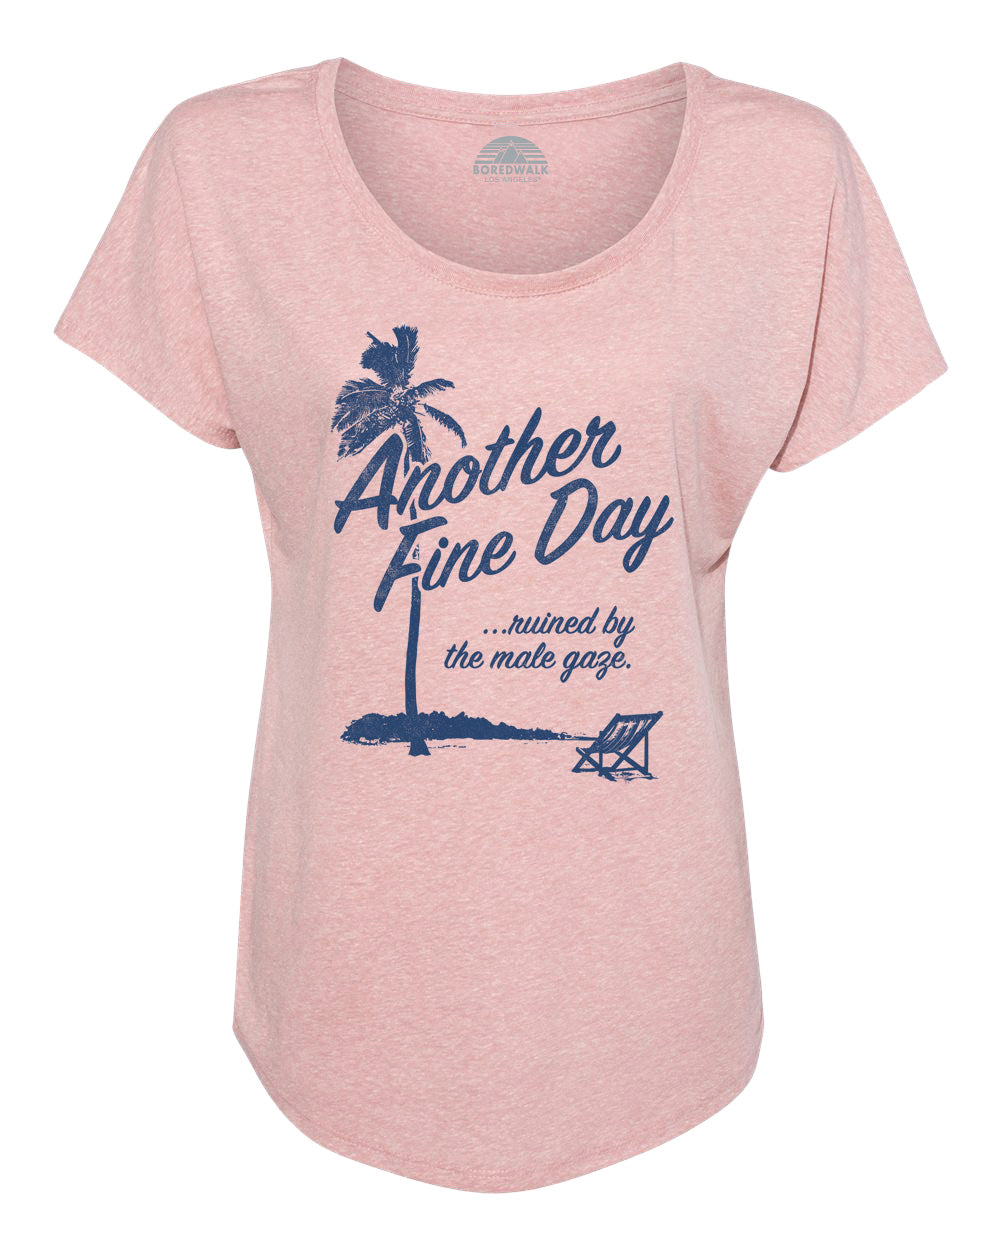 Women's Another Fine Day Ruined by the Male Gaze Scoop Neck T-Shirt